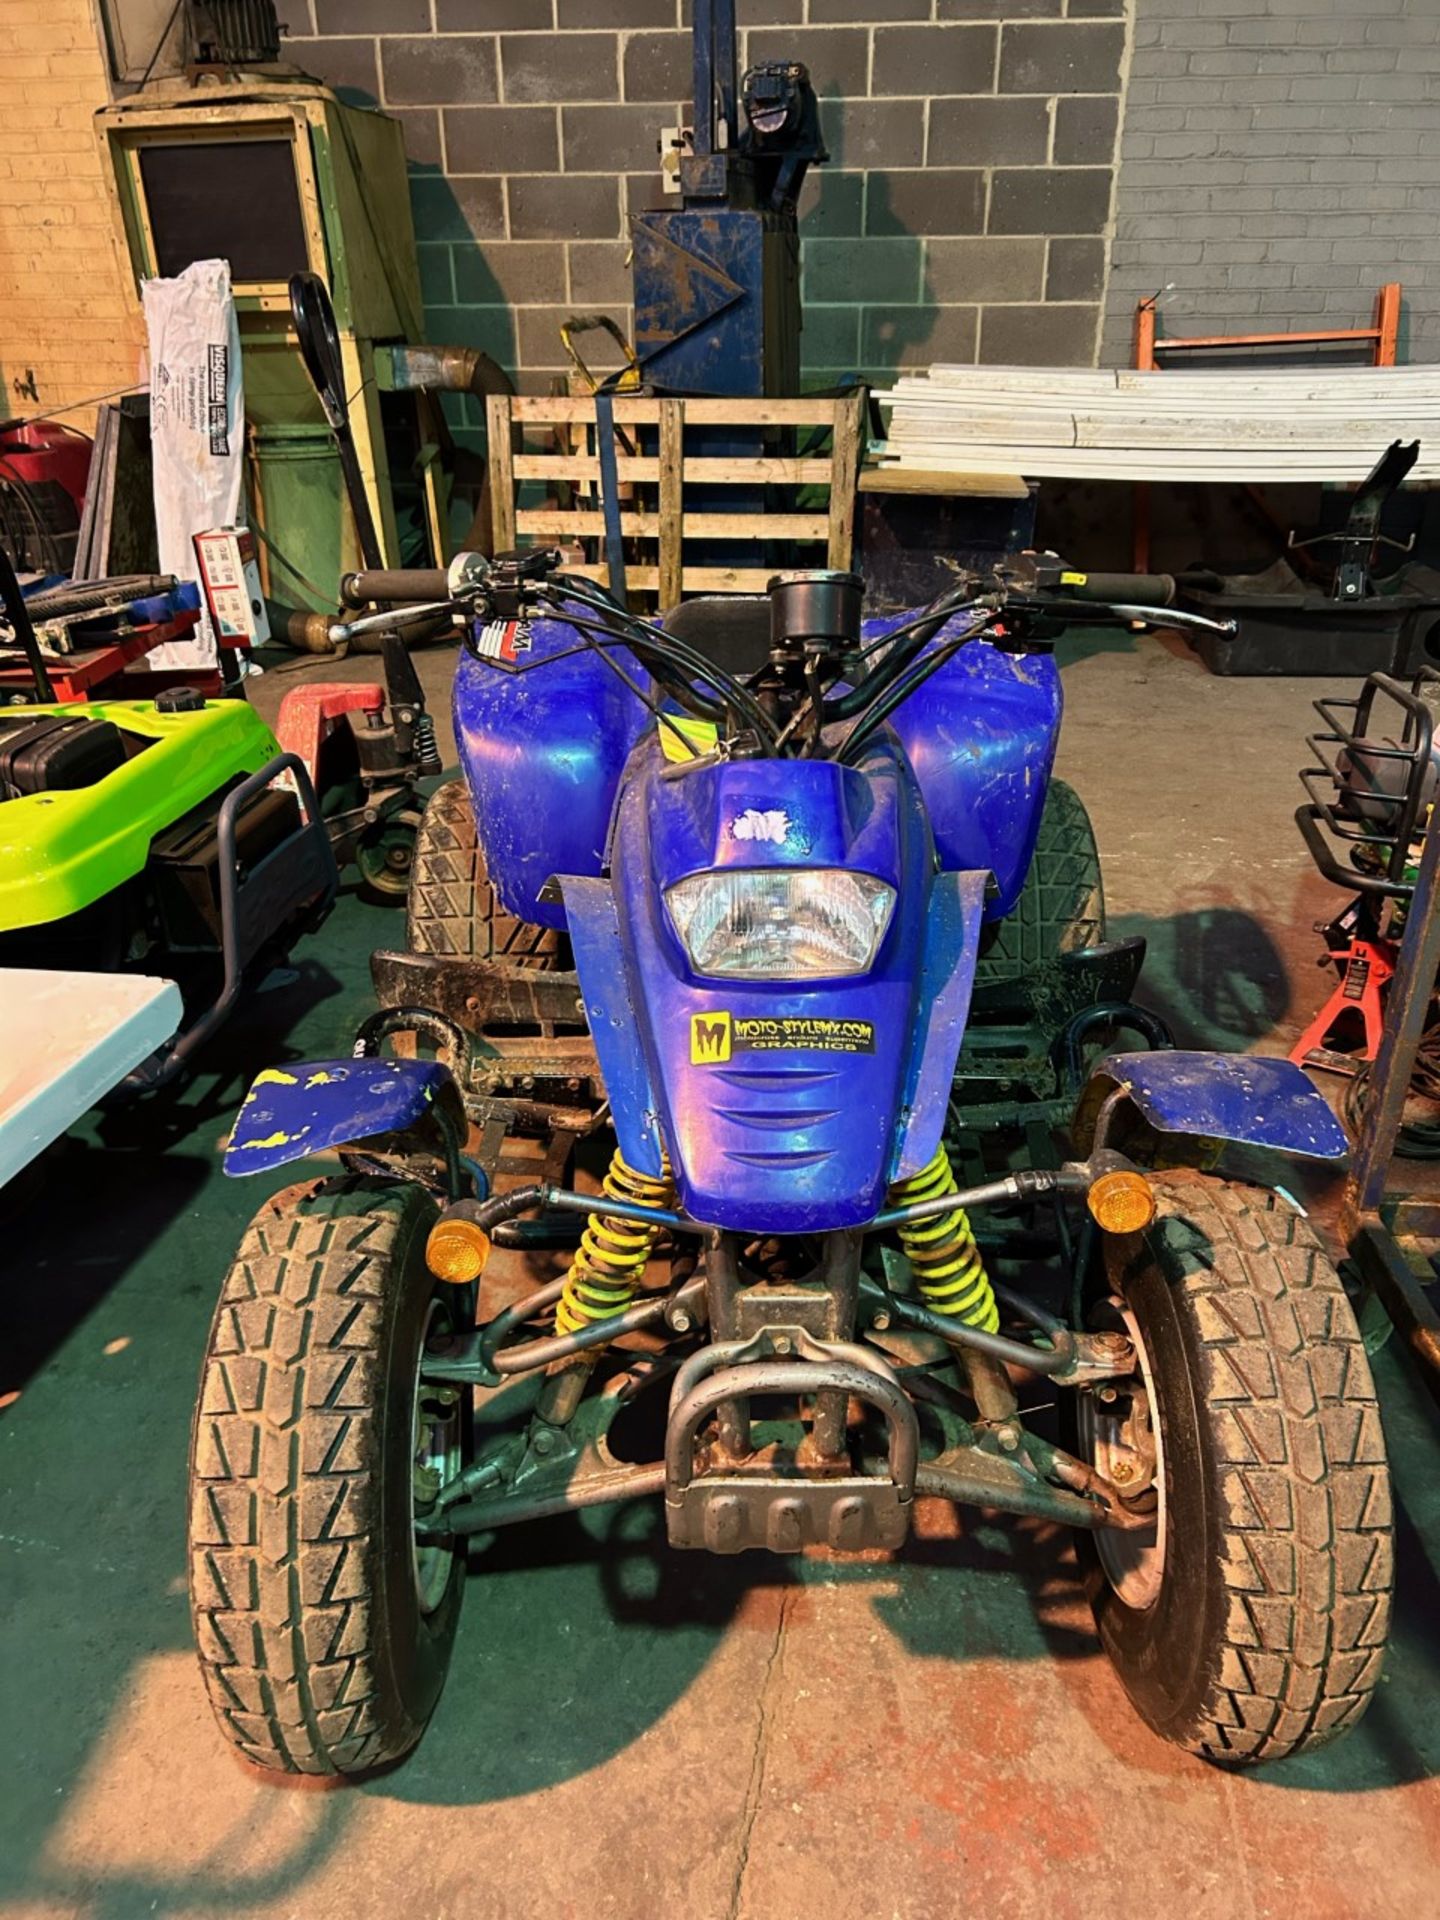 Road legal quadzilla ram 250. On an 04 plate. Very quick bike. Comes with V5 no MOT